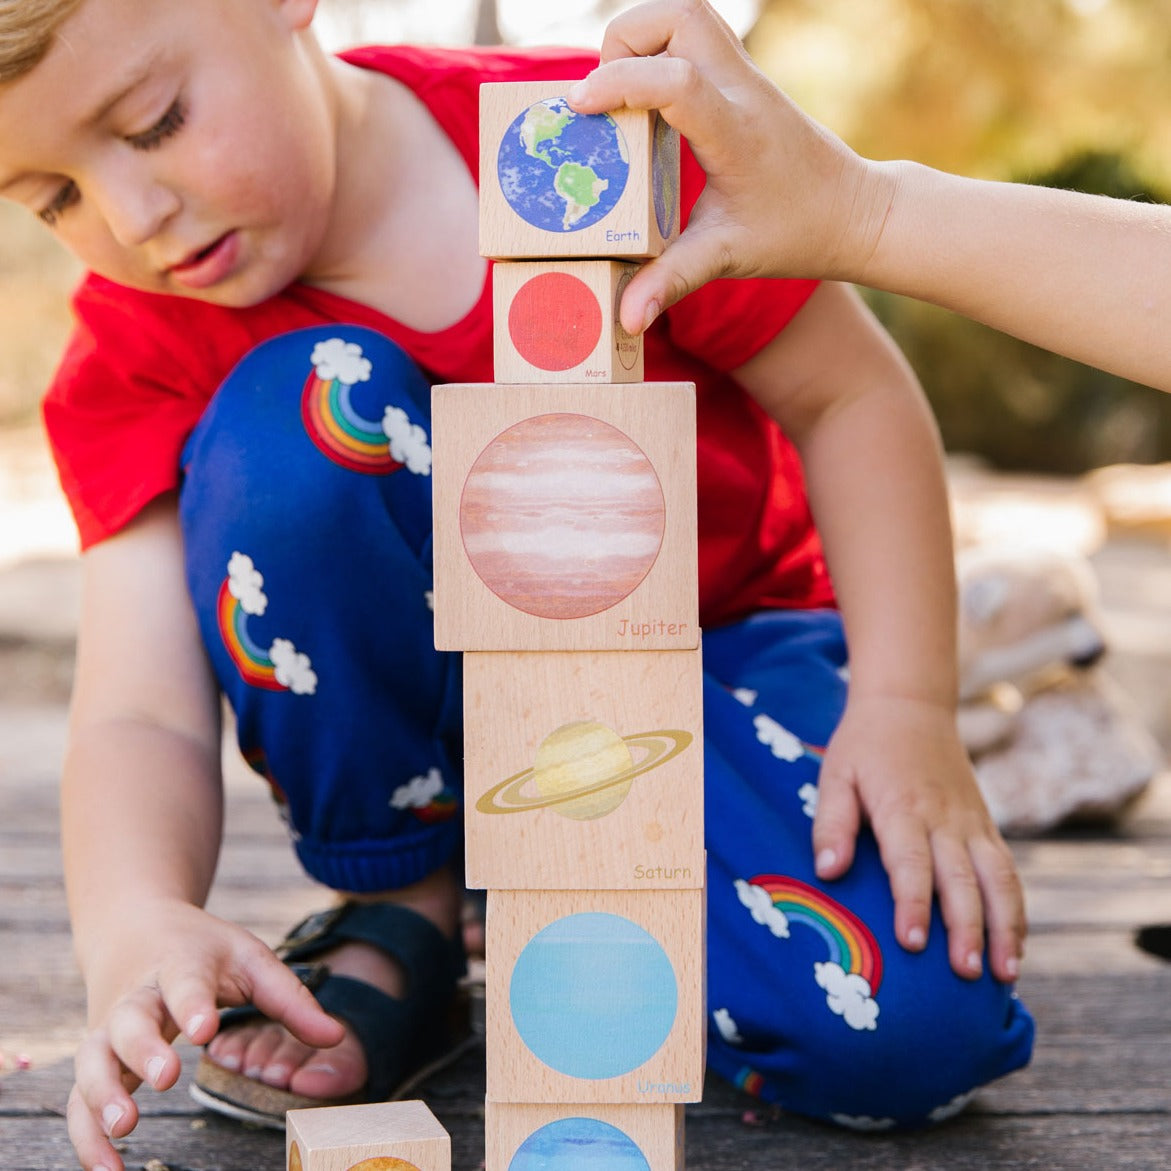 Playing with Planets, Take learning to a new level with this set of beautifully illustrated blocks that will take your little one on a journey through outer space. With eight blocks, one for each planet in our solar system, children can explore the size and distance of each planet from the Earth. The diameter of each planet is displayed on the blocks, aiding in the understanding of size ratios and distance in space. Stacking the blocks is not only fun, but also helps develop their fine motor and cognitive s